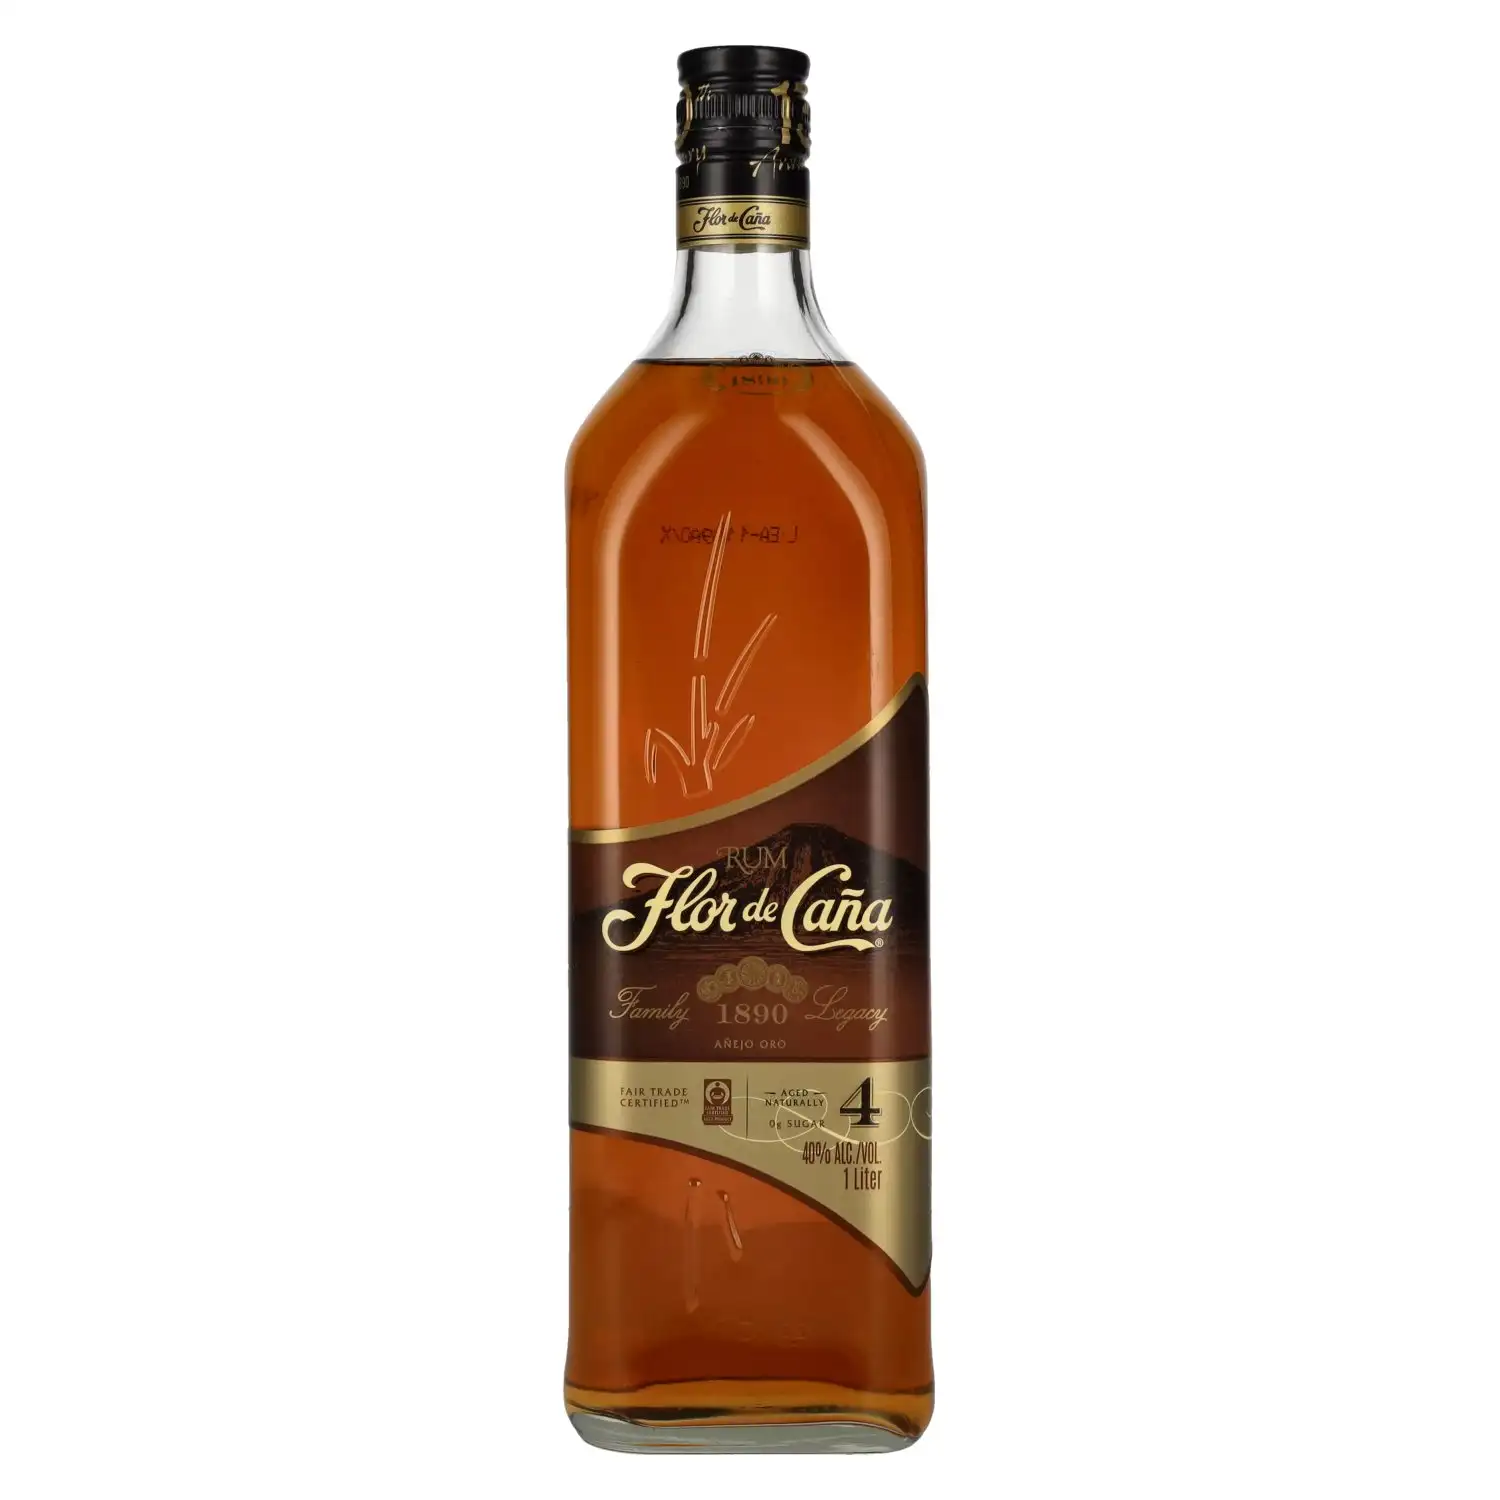 Image of the front of the bottle of the rum Flor de Caña 4 Años Añejo Oro